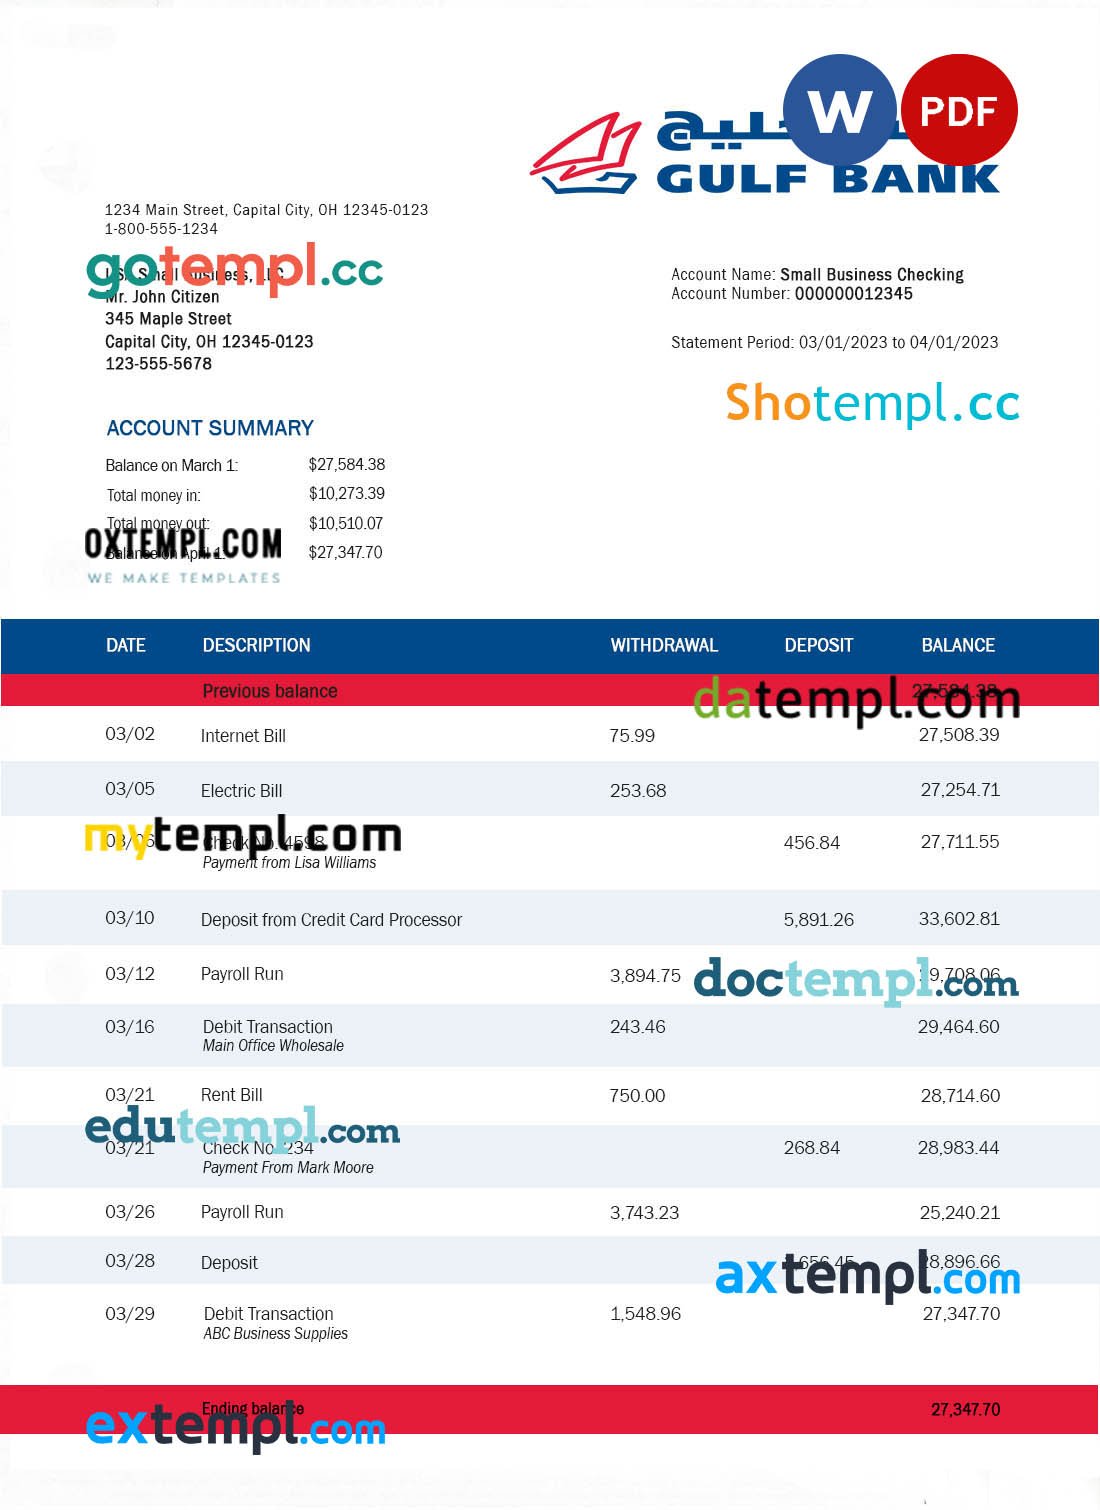 Gulf Bank company account statement Word and PDF template